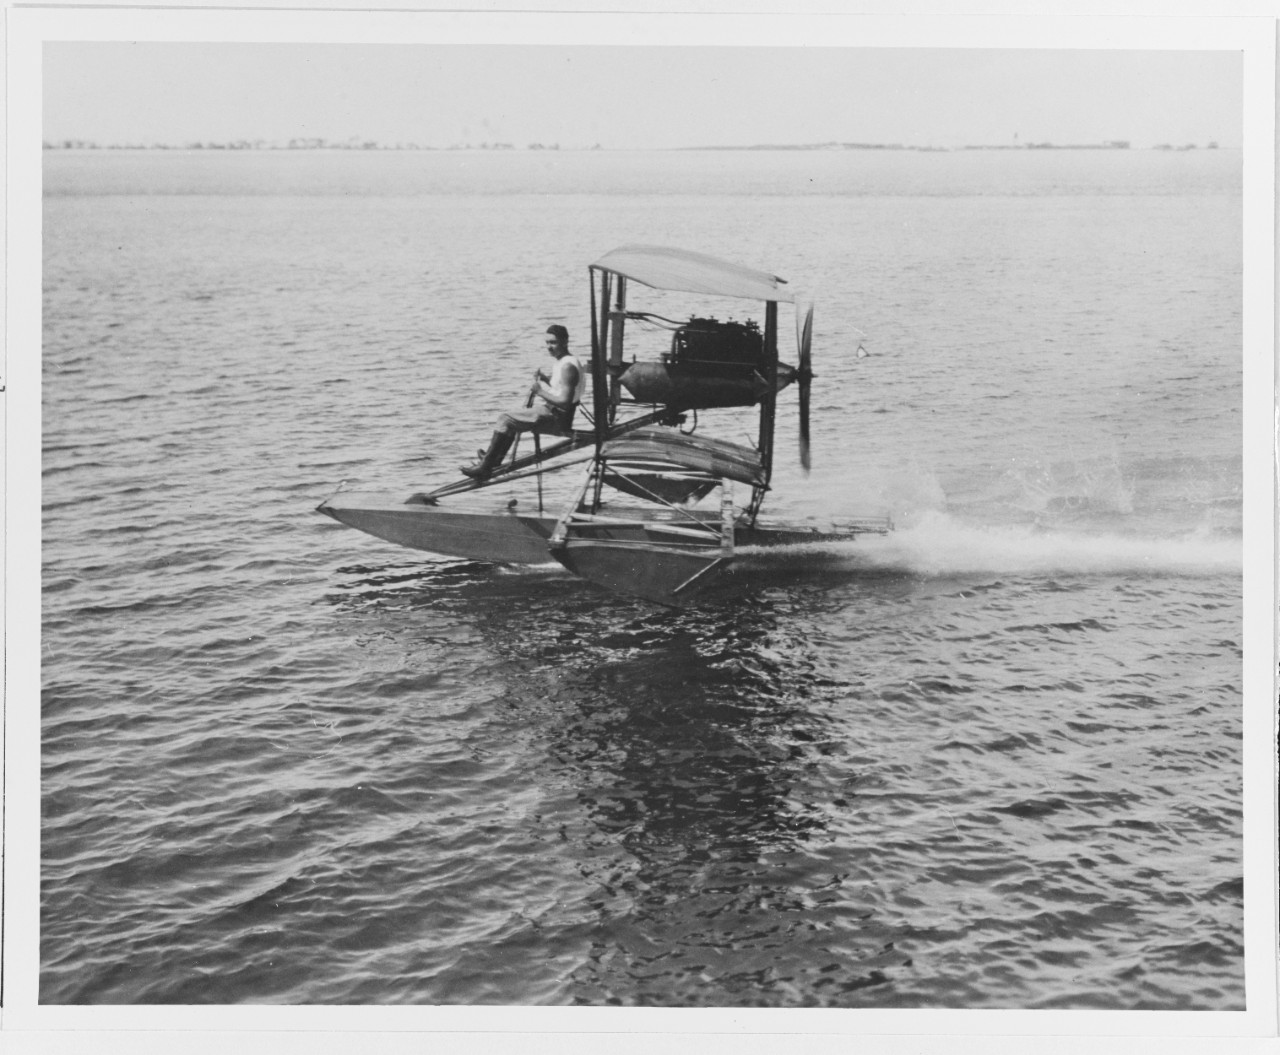 Lieutenant Earl W. Spencer underway in the "Skimmer " taxing trainer, June 1916. This appears to be a Curtiss "A" type aircraft with the tall and most of the wing removed.